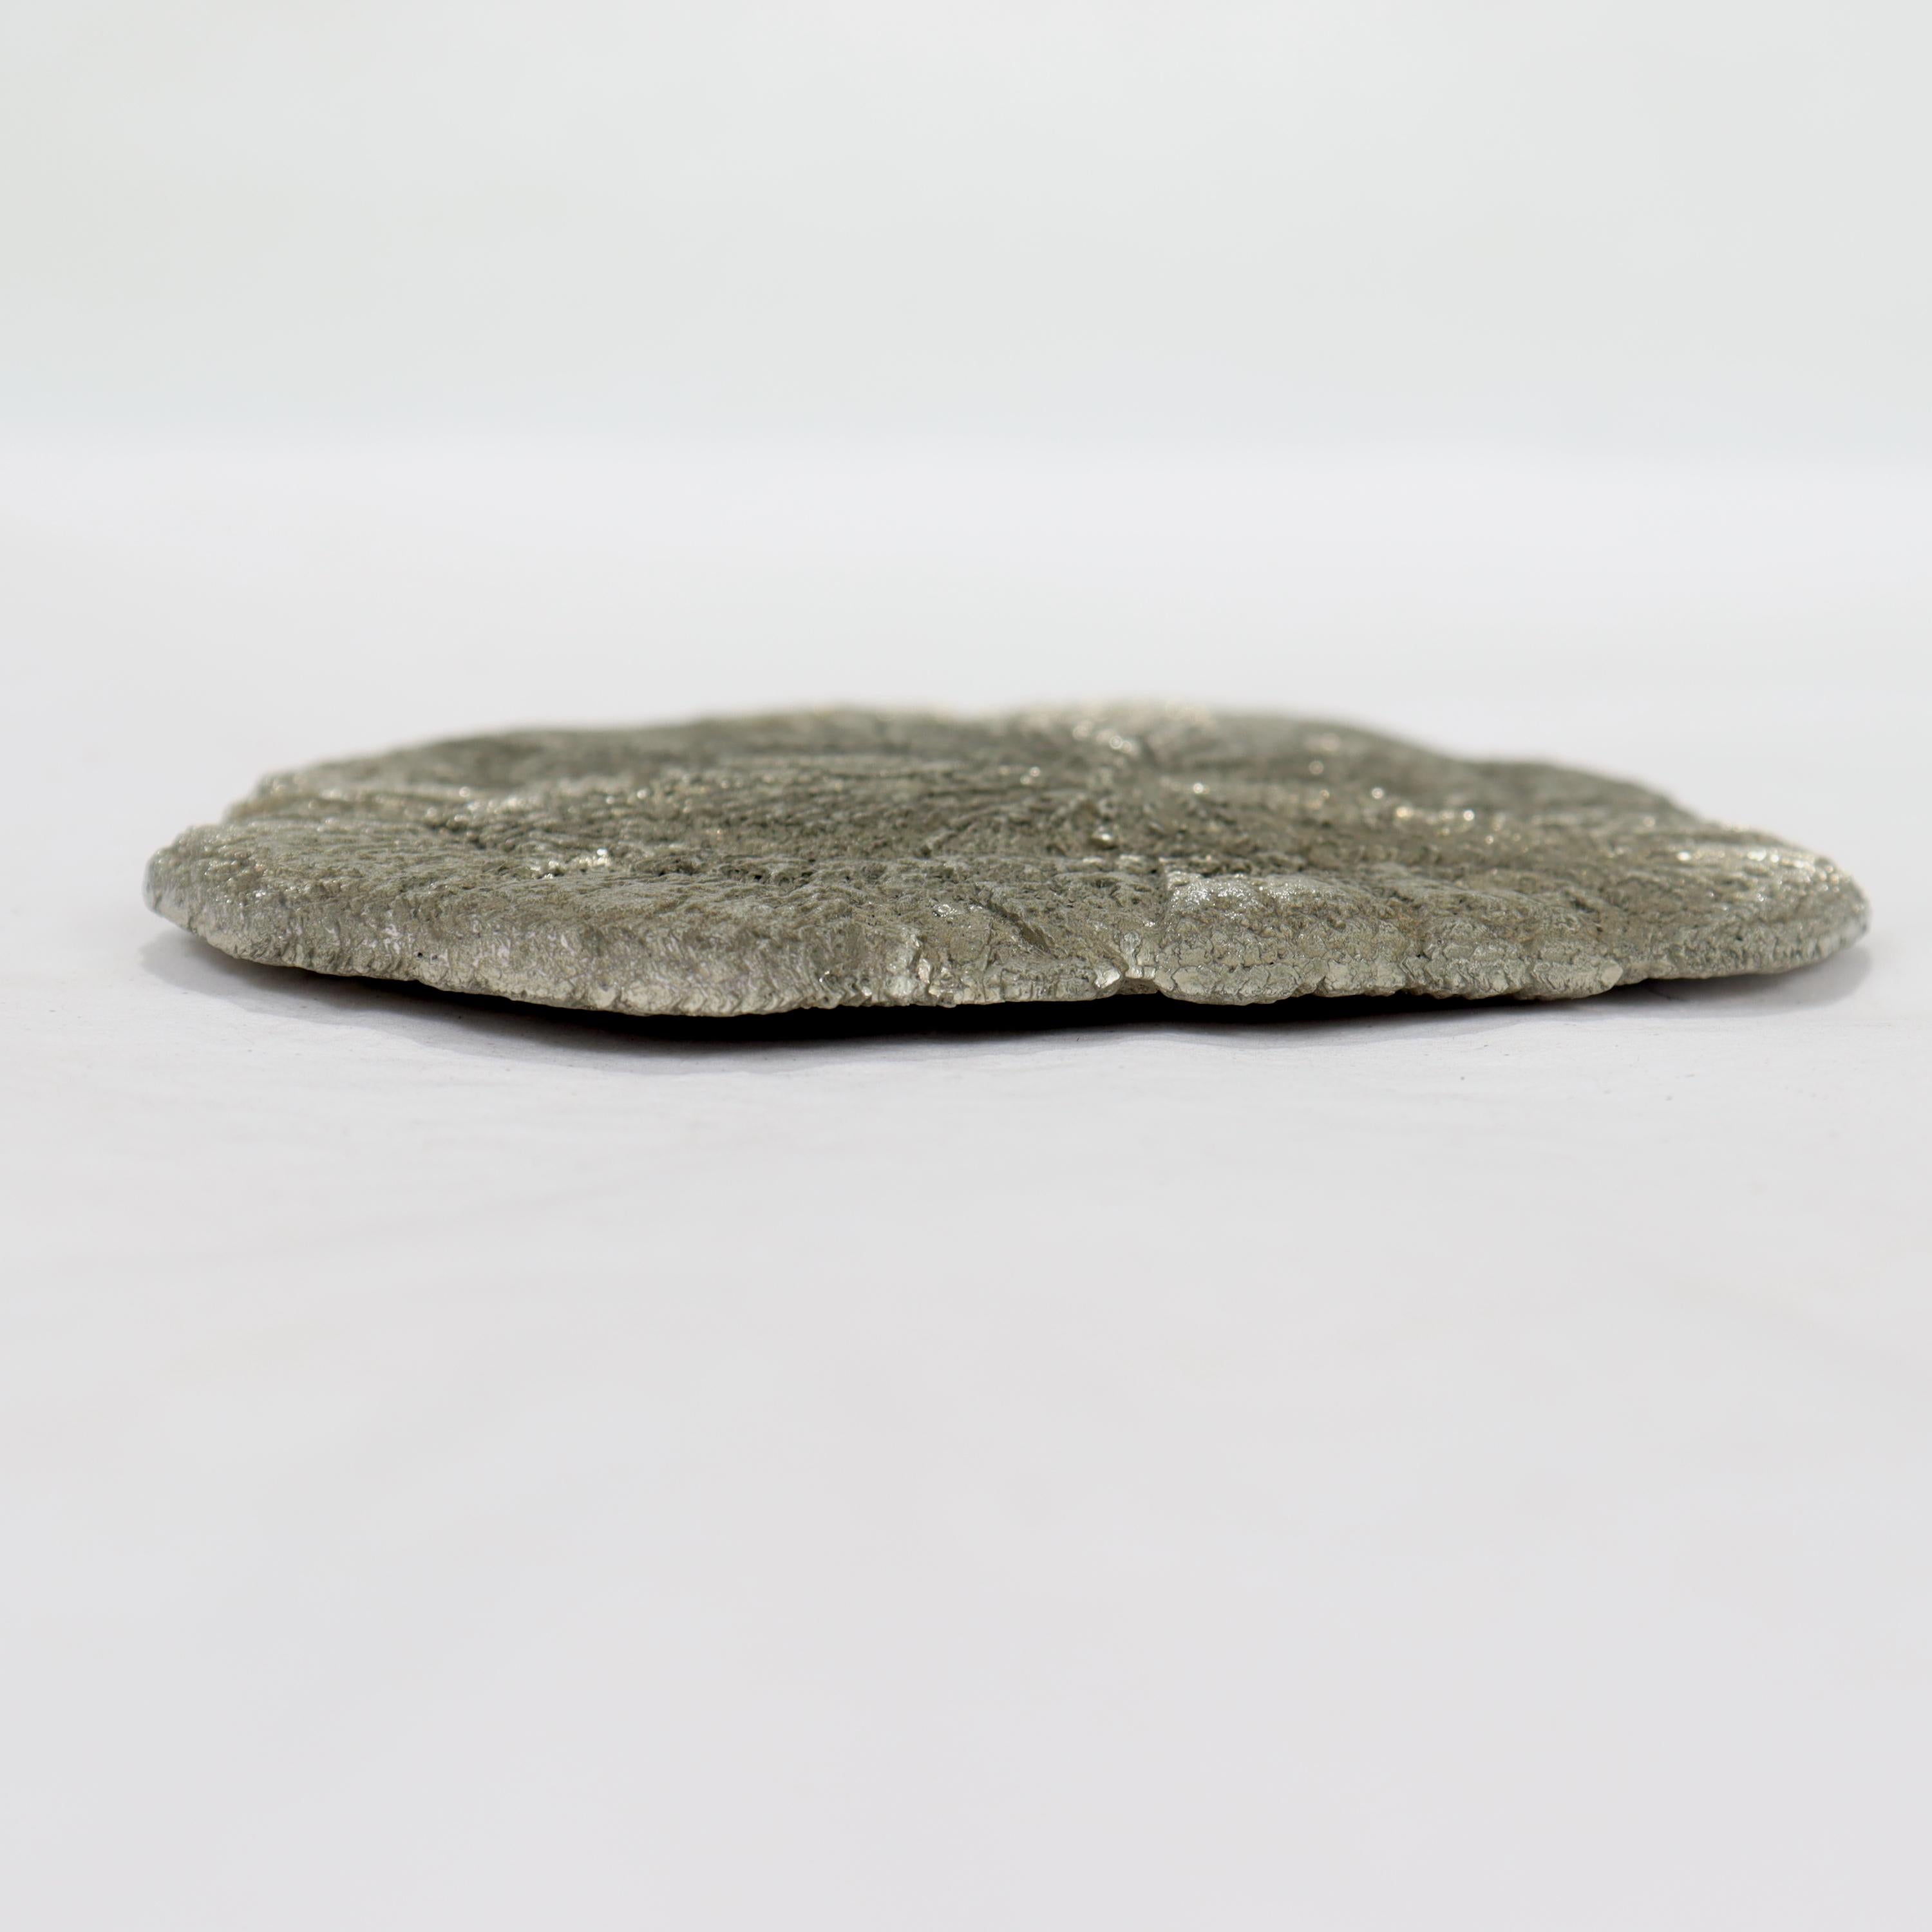 Flat Pyrite Crystal Specimen Paperweight For Sale 2